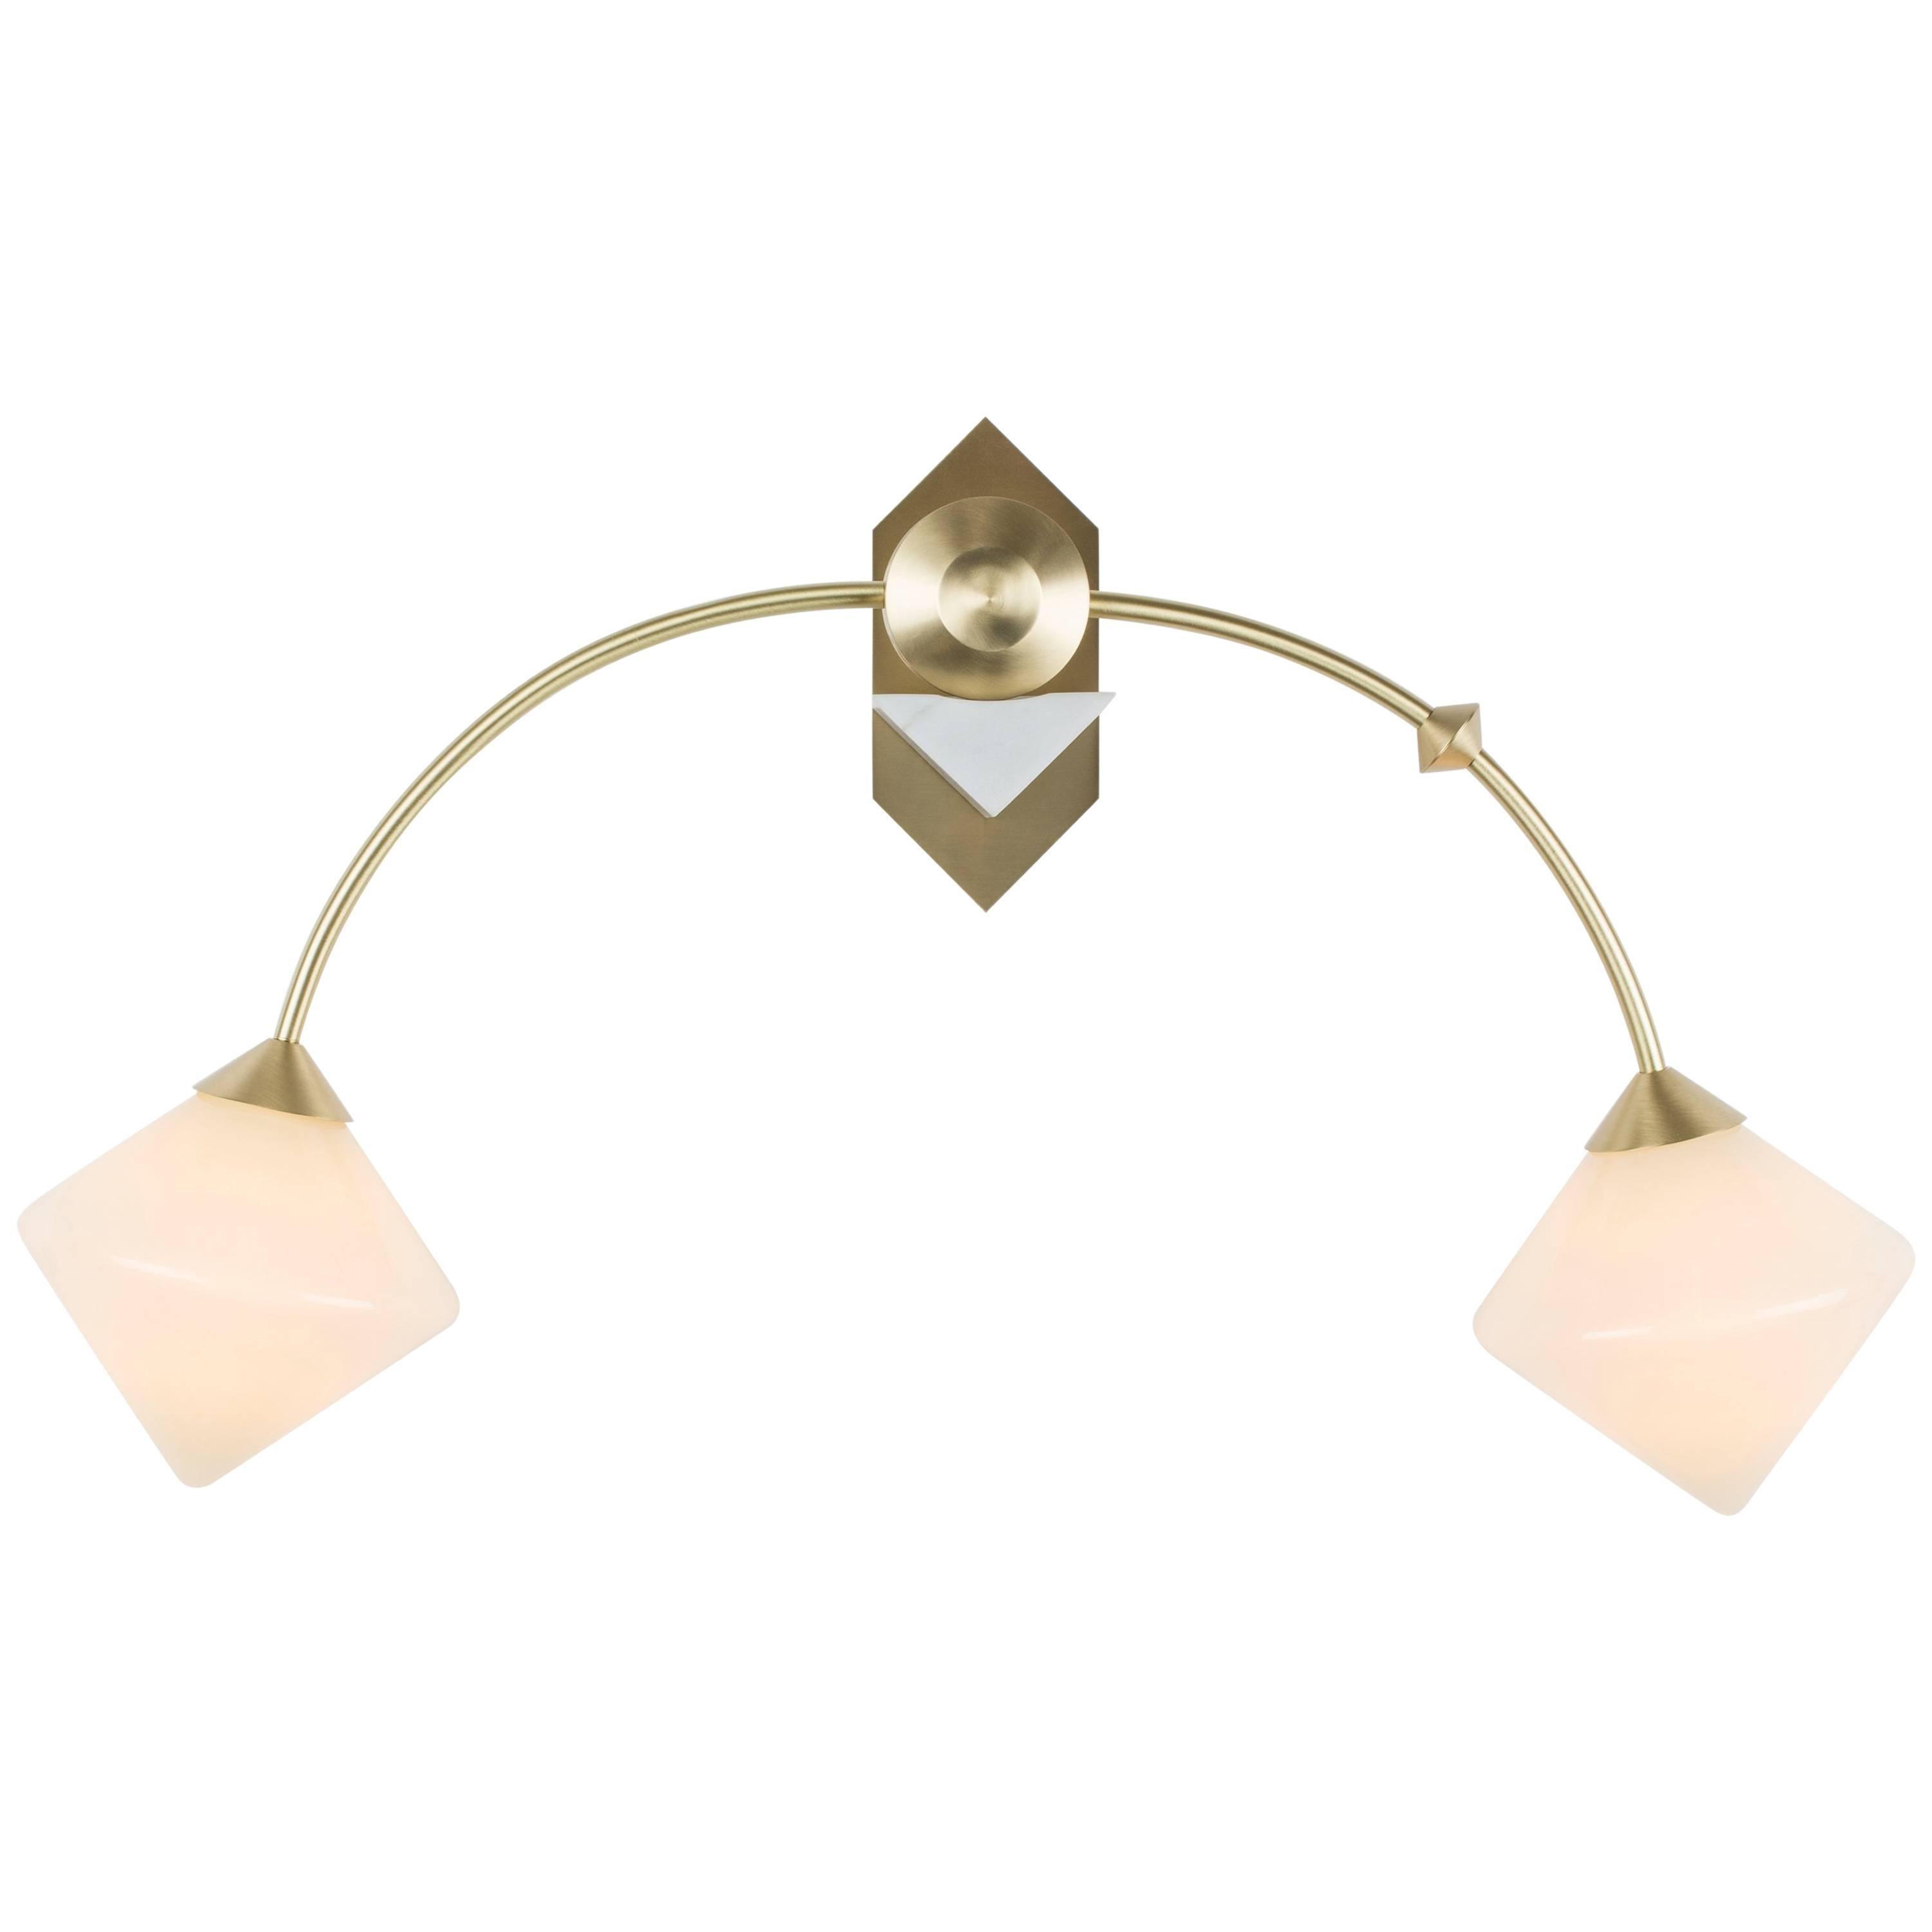 Bec Brittain FKA THEMIS 27 Balancing Sconce, Marble Bracket, and Handblown Glass For Sale